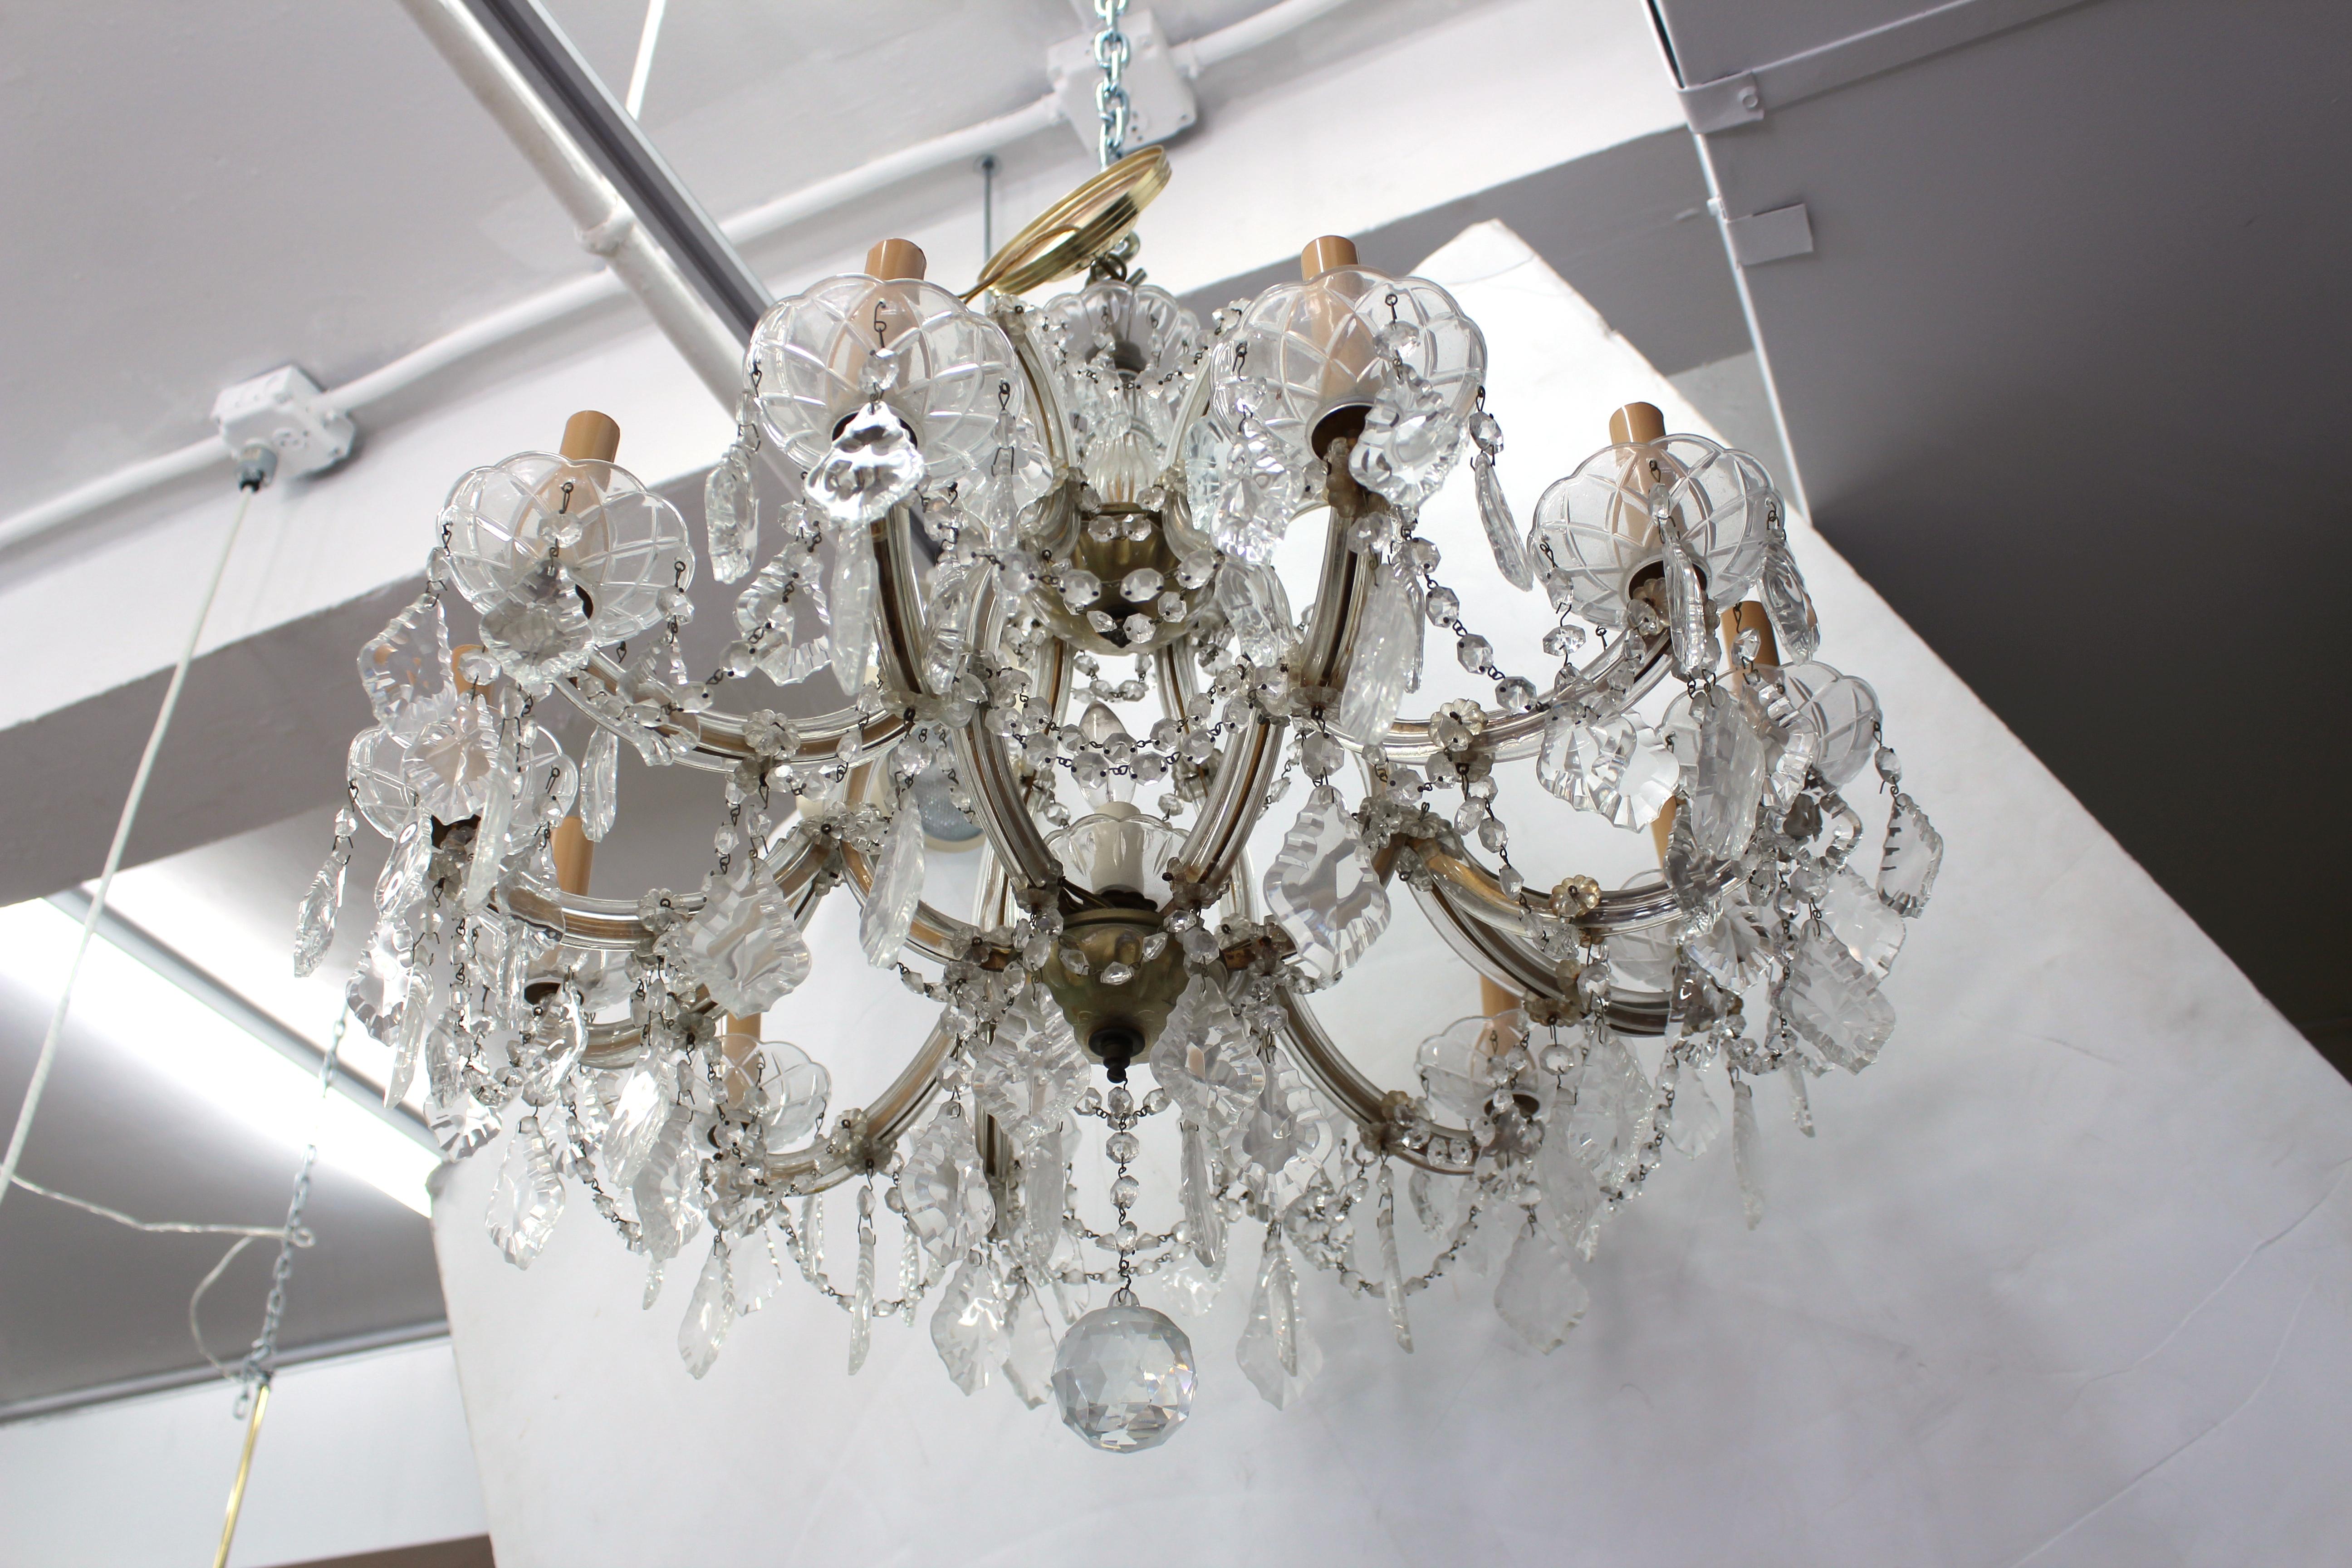 20th Century Chandelier with Twelve Arms and Crystal Ornaments